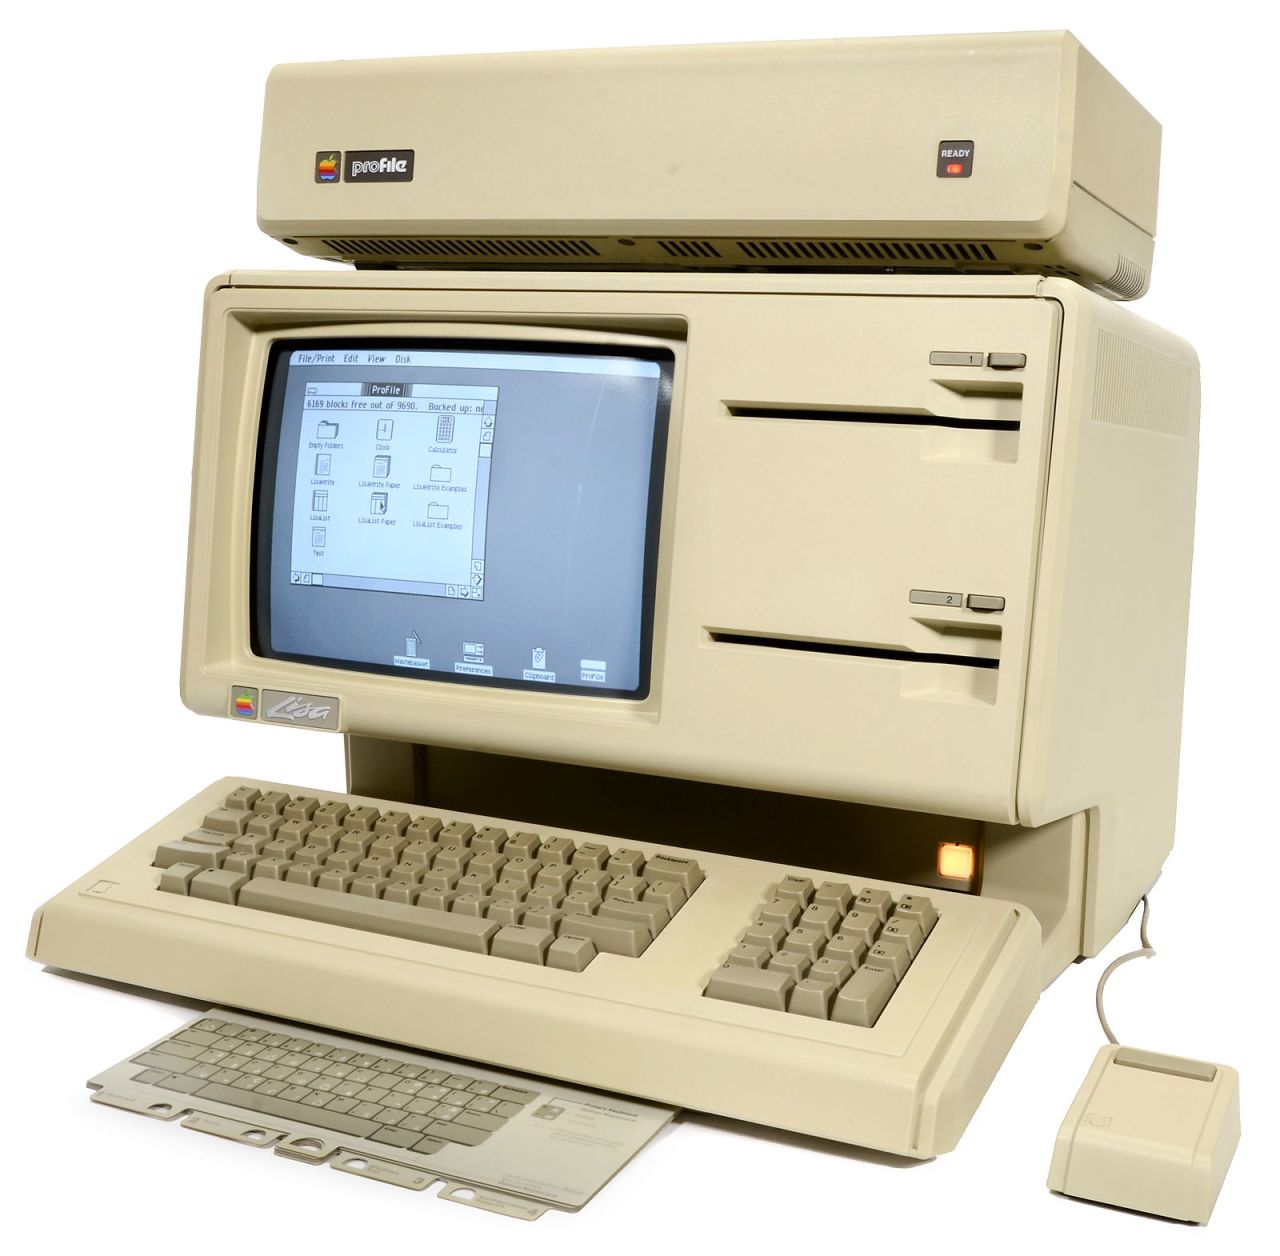 The Apple Lisa, from 1983, was produced for only one year, and was one of the world's first mouse-controlled computers. It is now extremely rare.